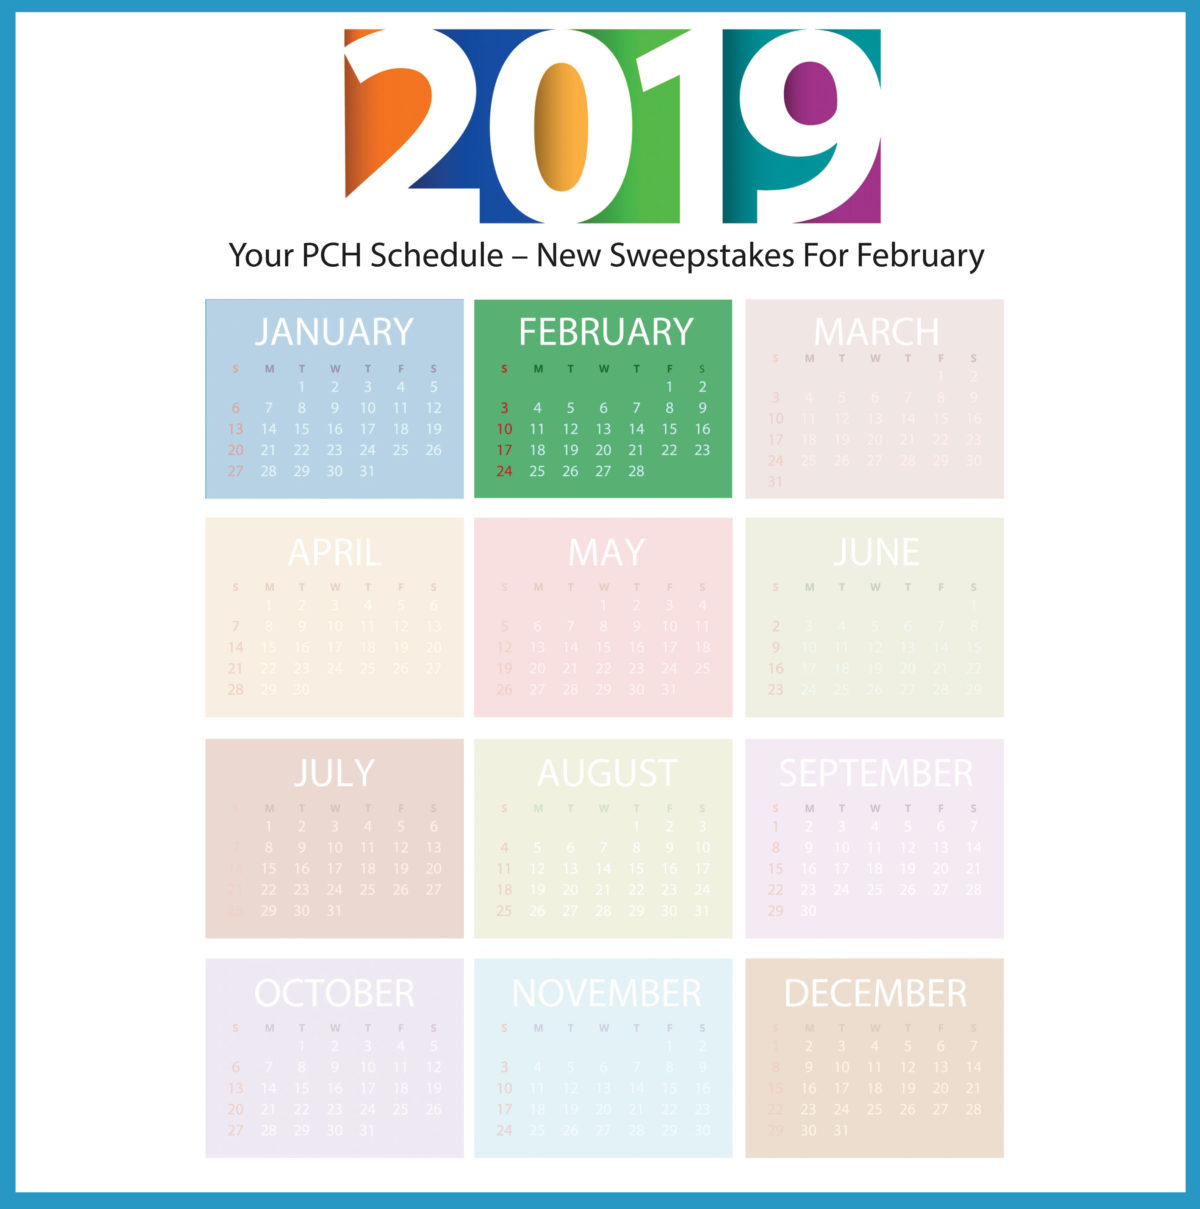 Your PCH Schedule – New Sweepstakes For February